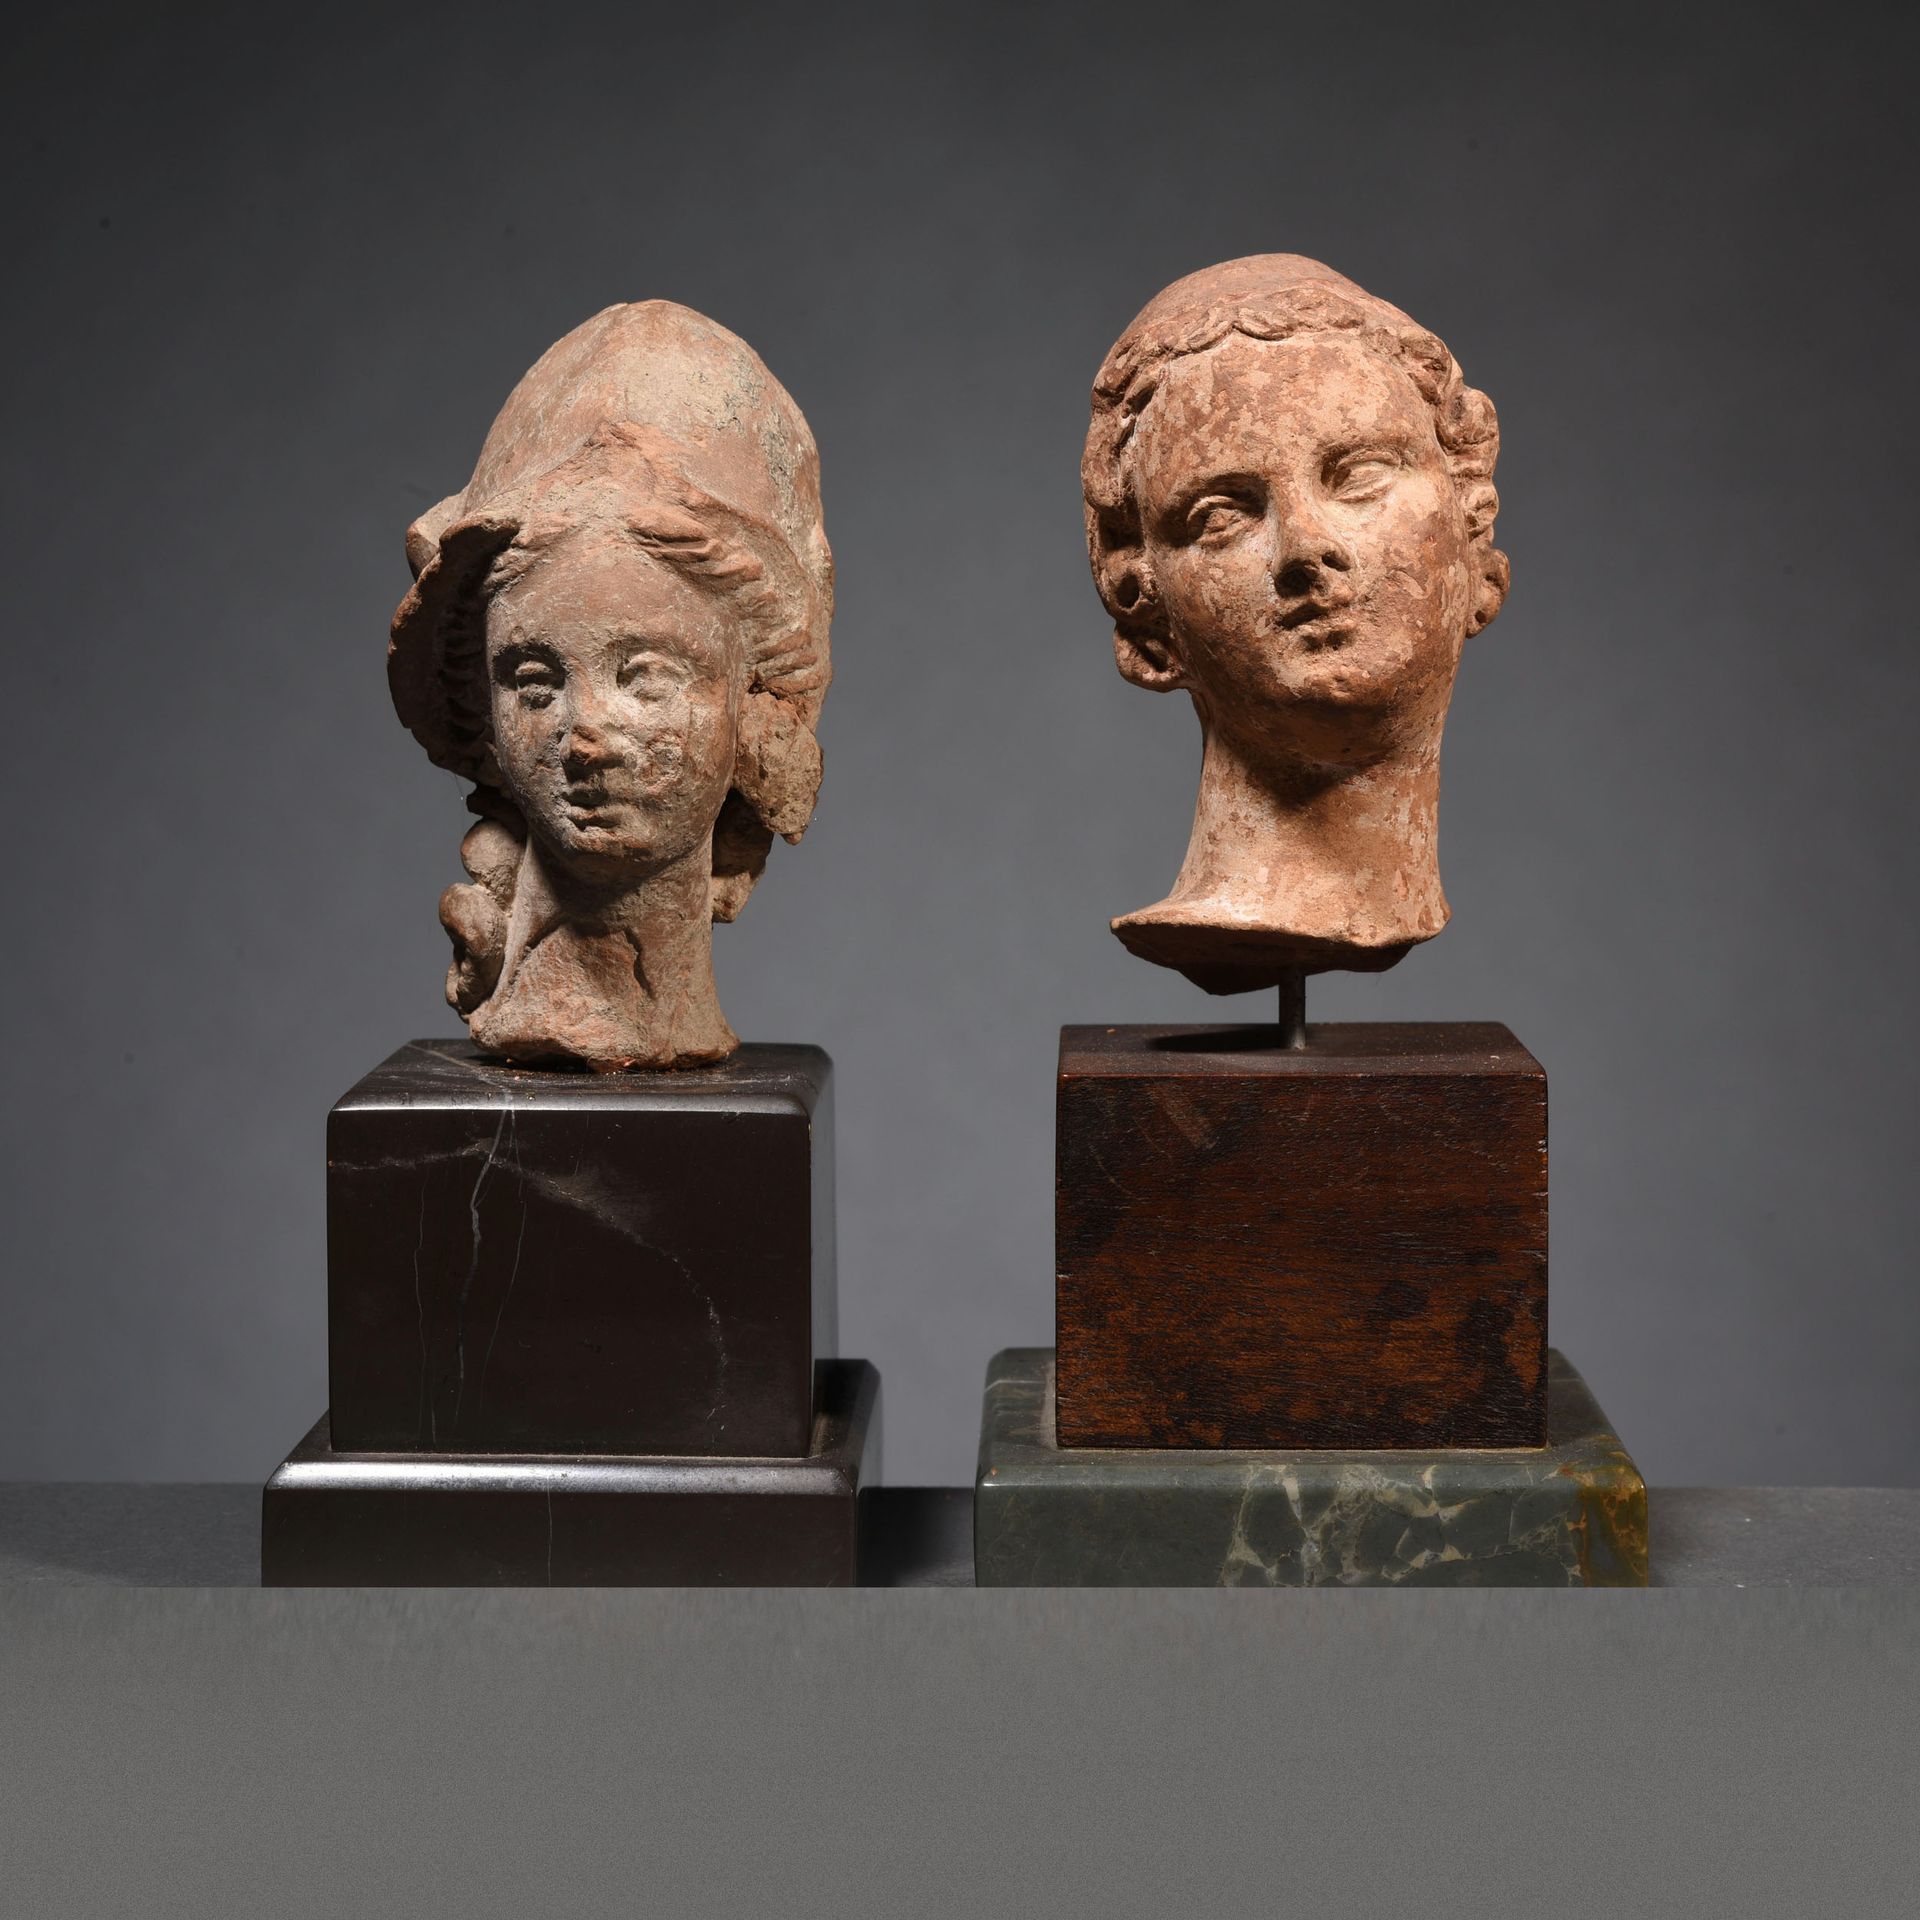 Null SET OF 2 EX-VOTO HEADS

Hellenistic art

In terracotta 



Provenance

Form&hellip;